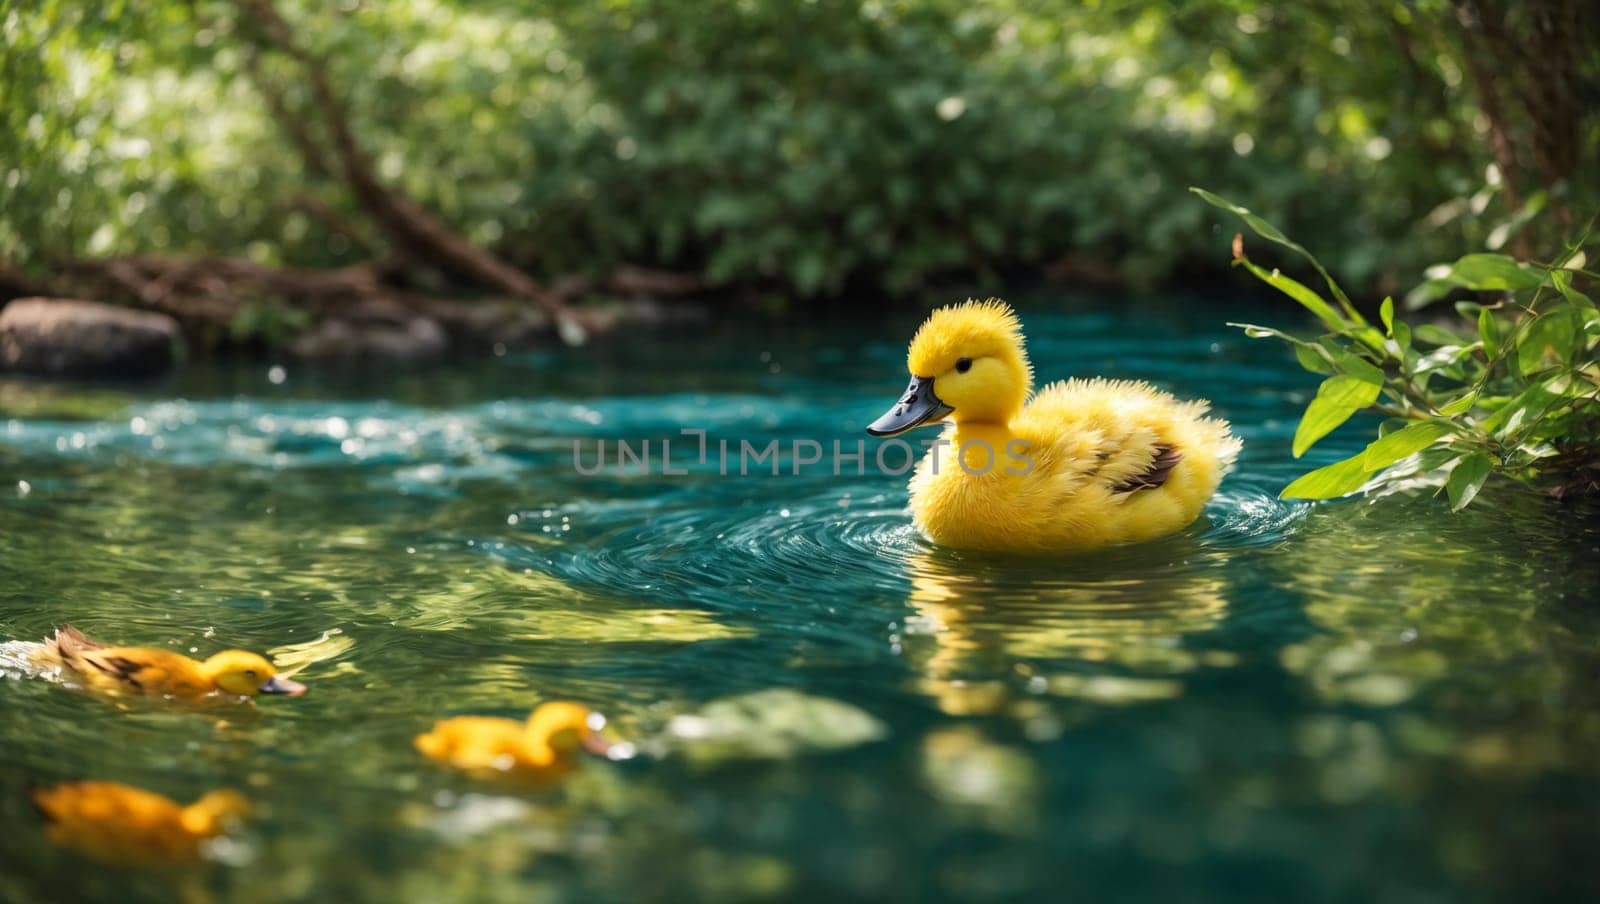 A yellow duckling swims in the bright blue water of the river, surrounded by lush greenery of trees by Севостьянов